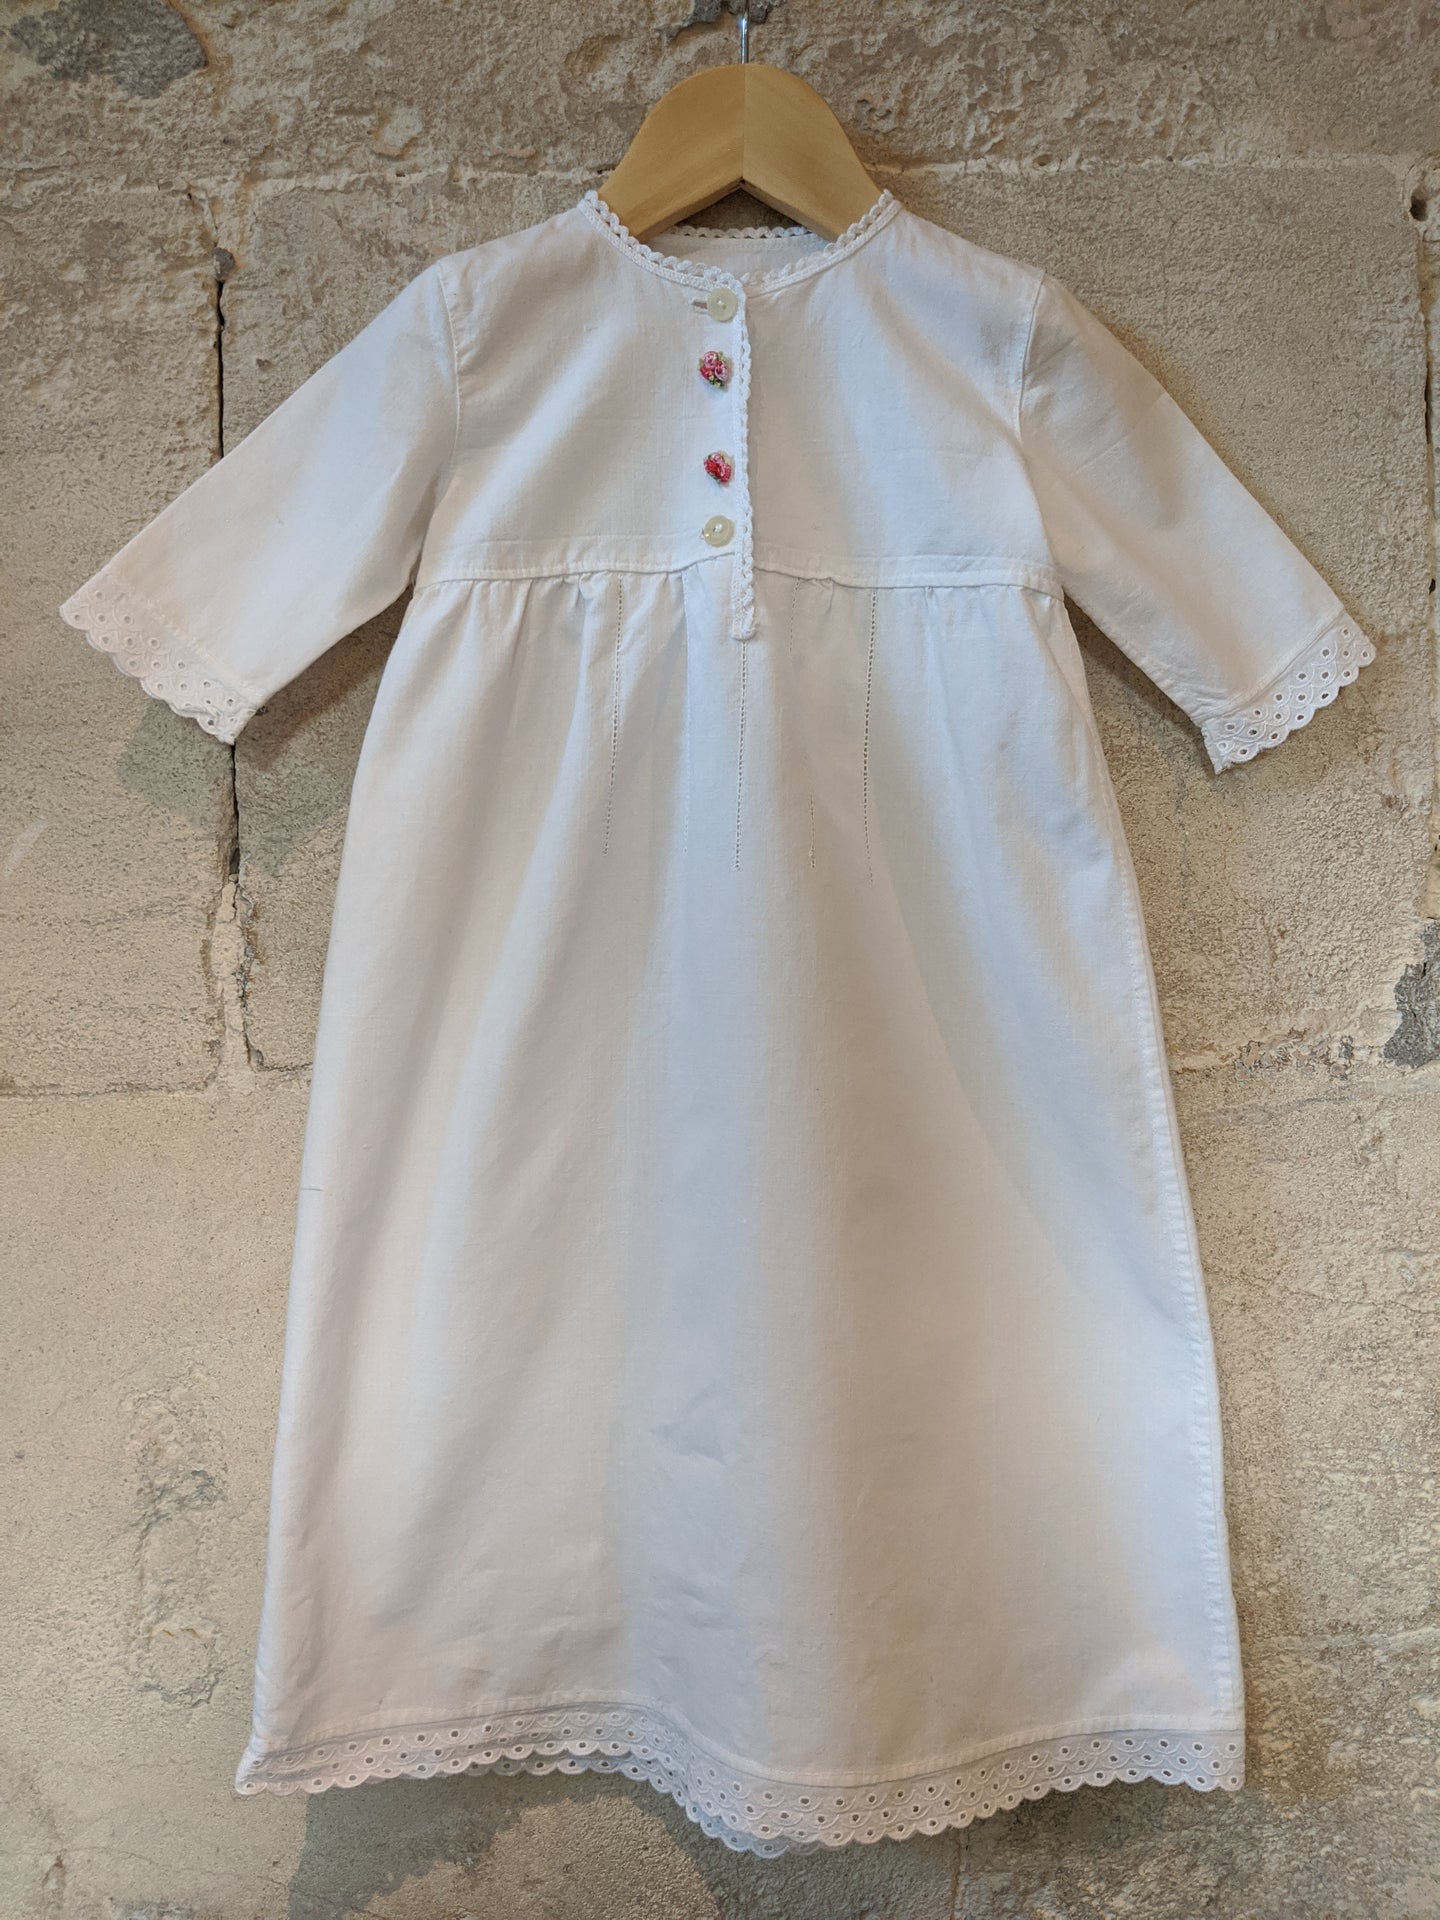 Stunning Antique Cotton Gown with Lace Trim 18 Months